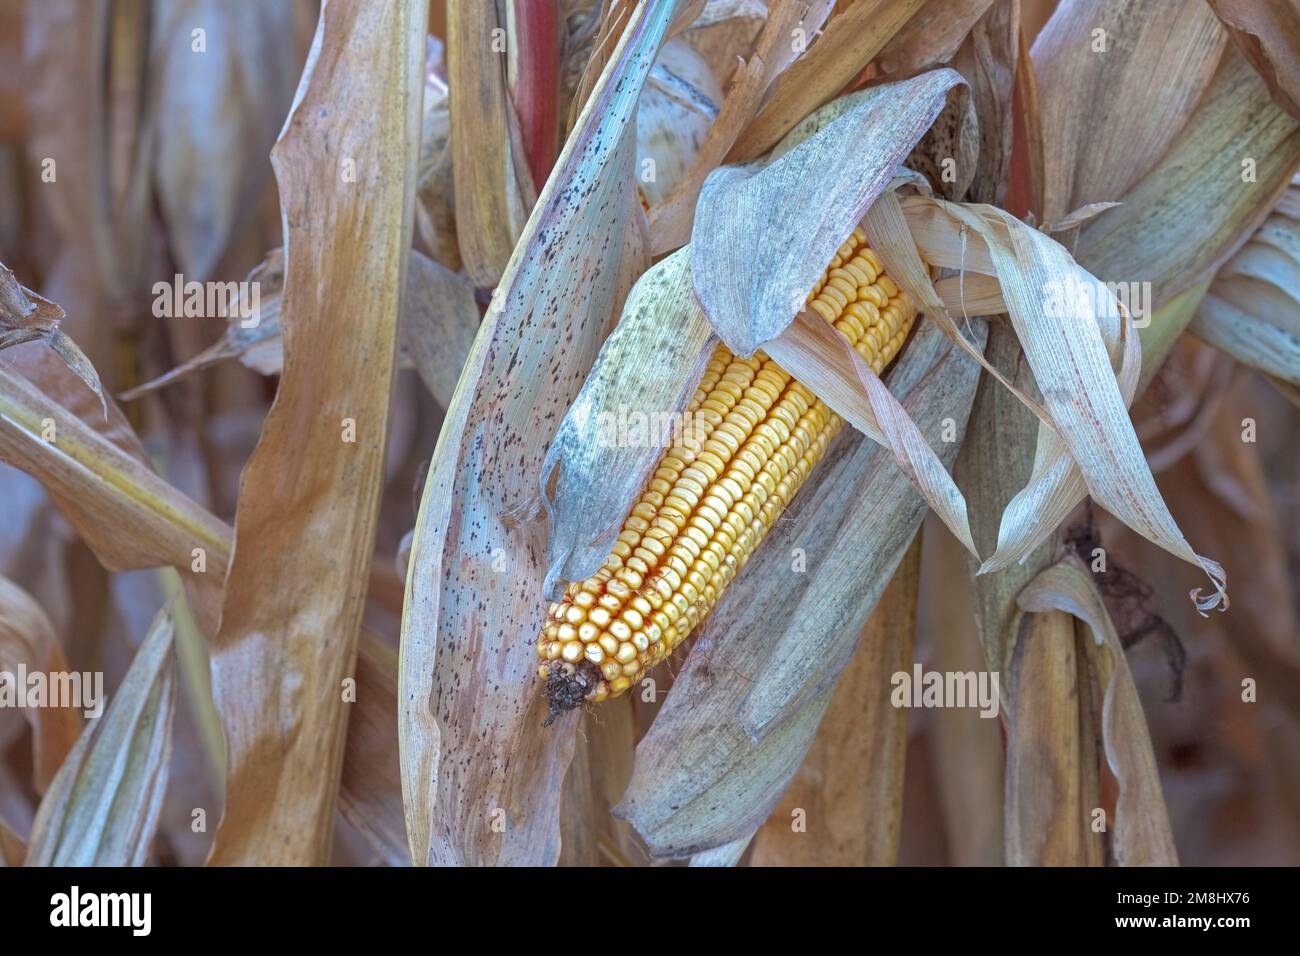 An golden ear of corn still on a stalk waits to be harvested for grain. Stock Photo